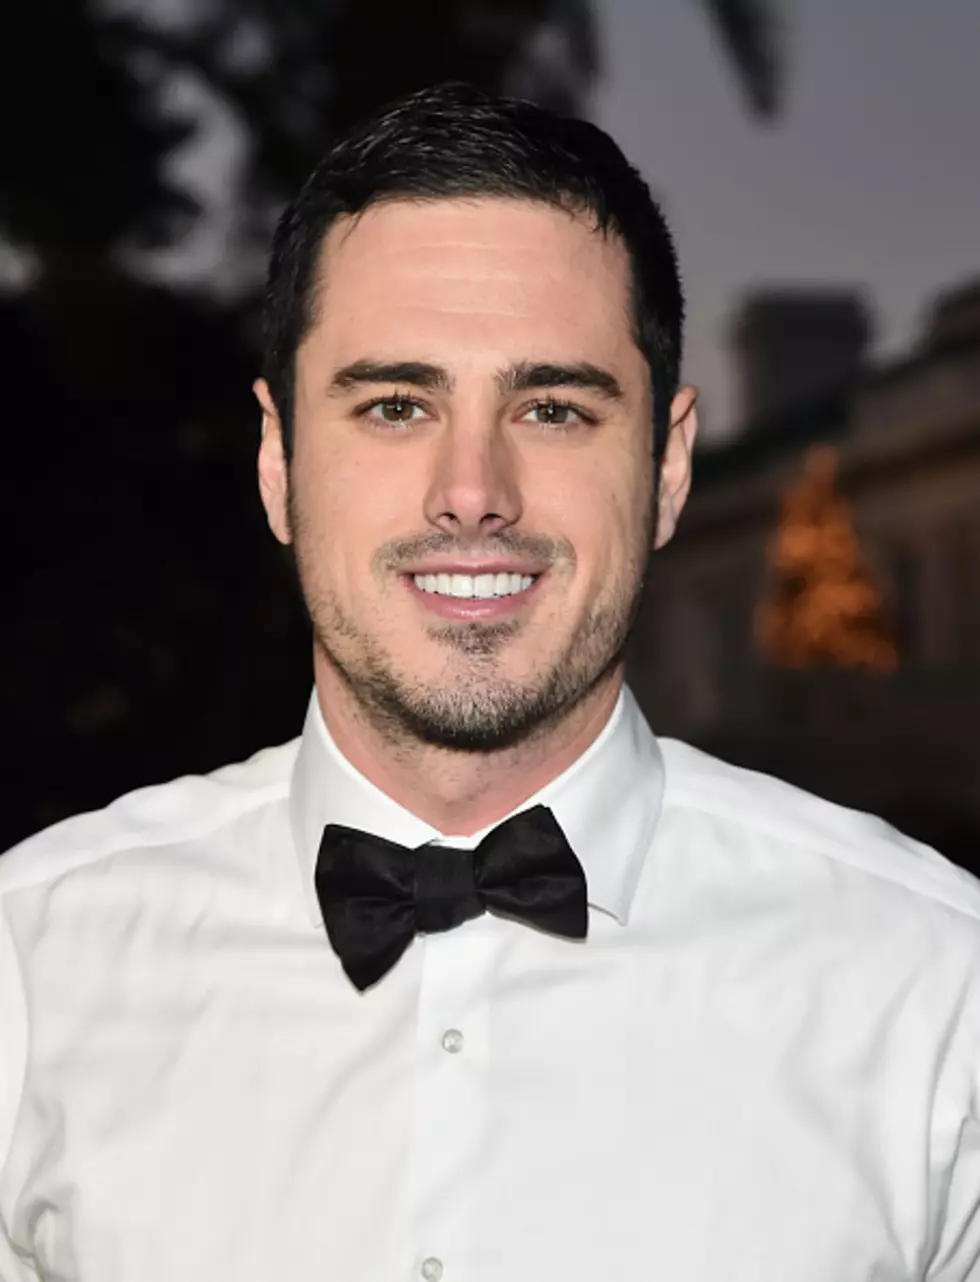 Republican Ben Higgins Officially Running for Office in Colorado